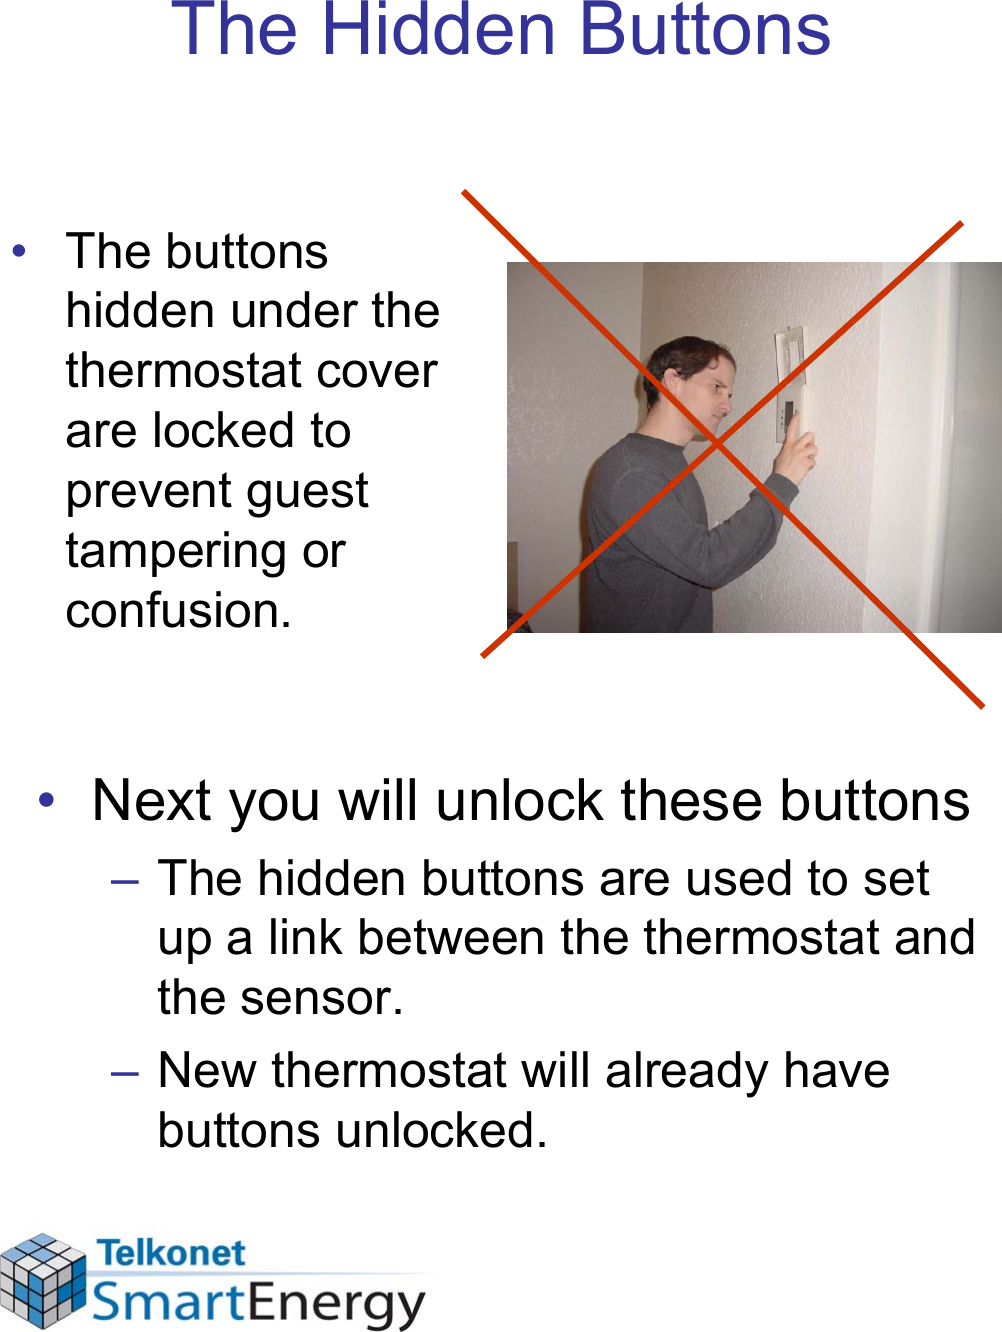 The Hidden Buttons• The buttons hidden under the thermostat cover are locked to prevent guest tampering or confusion.• Next you will unlock these buttons– The hidden buttons are used to set up a link between the thermostat and the sensor.– New thermostat will already have buttons unlocked.